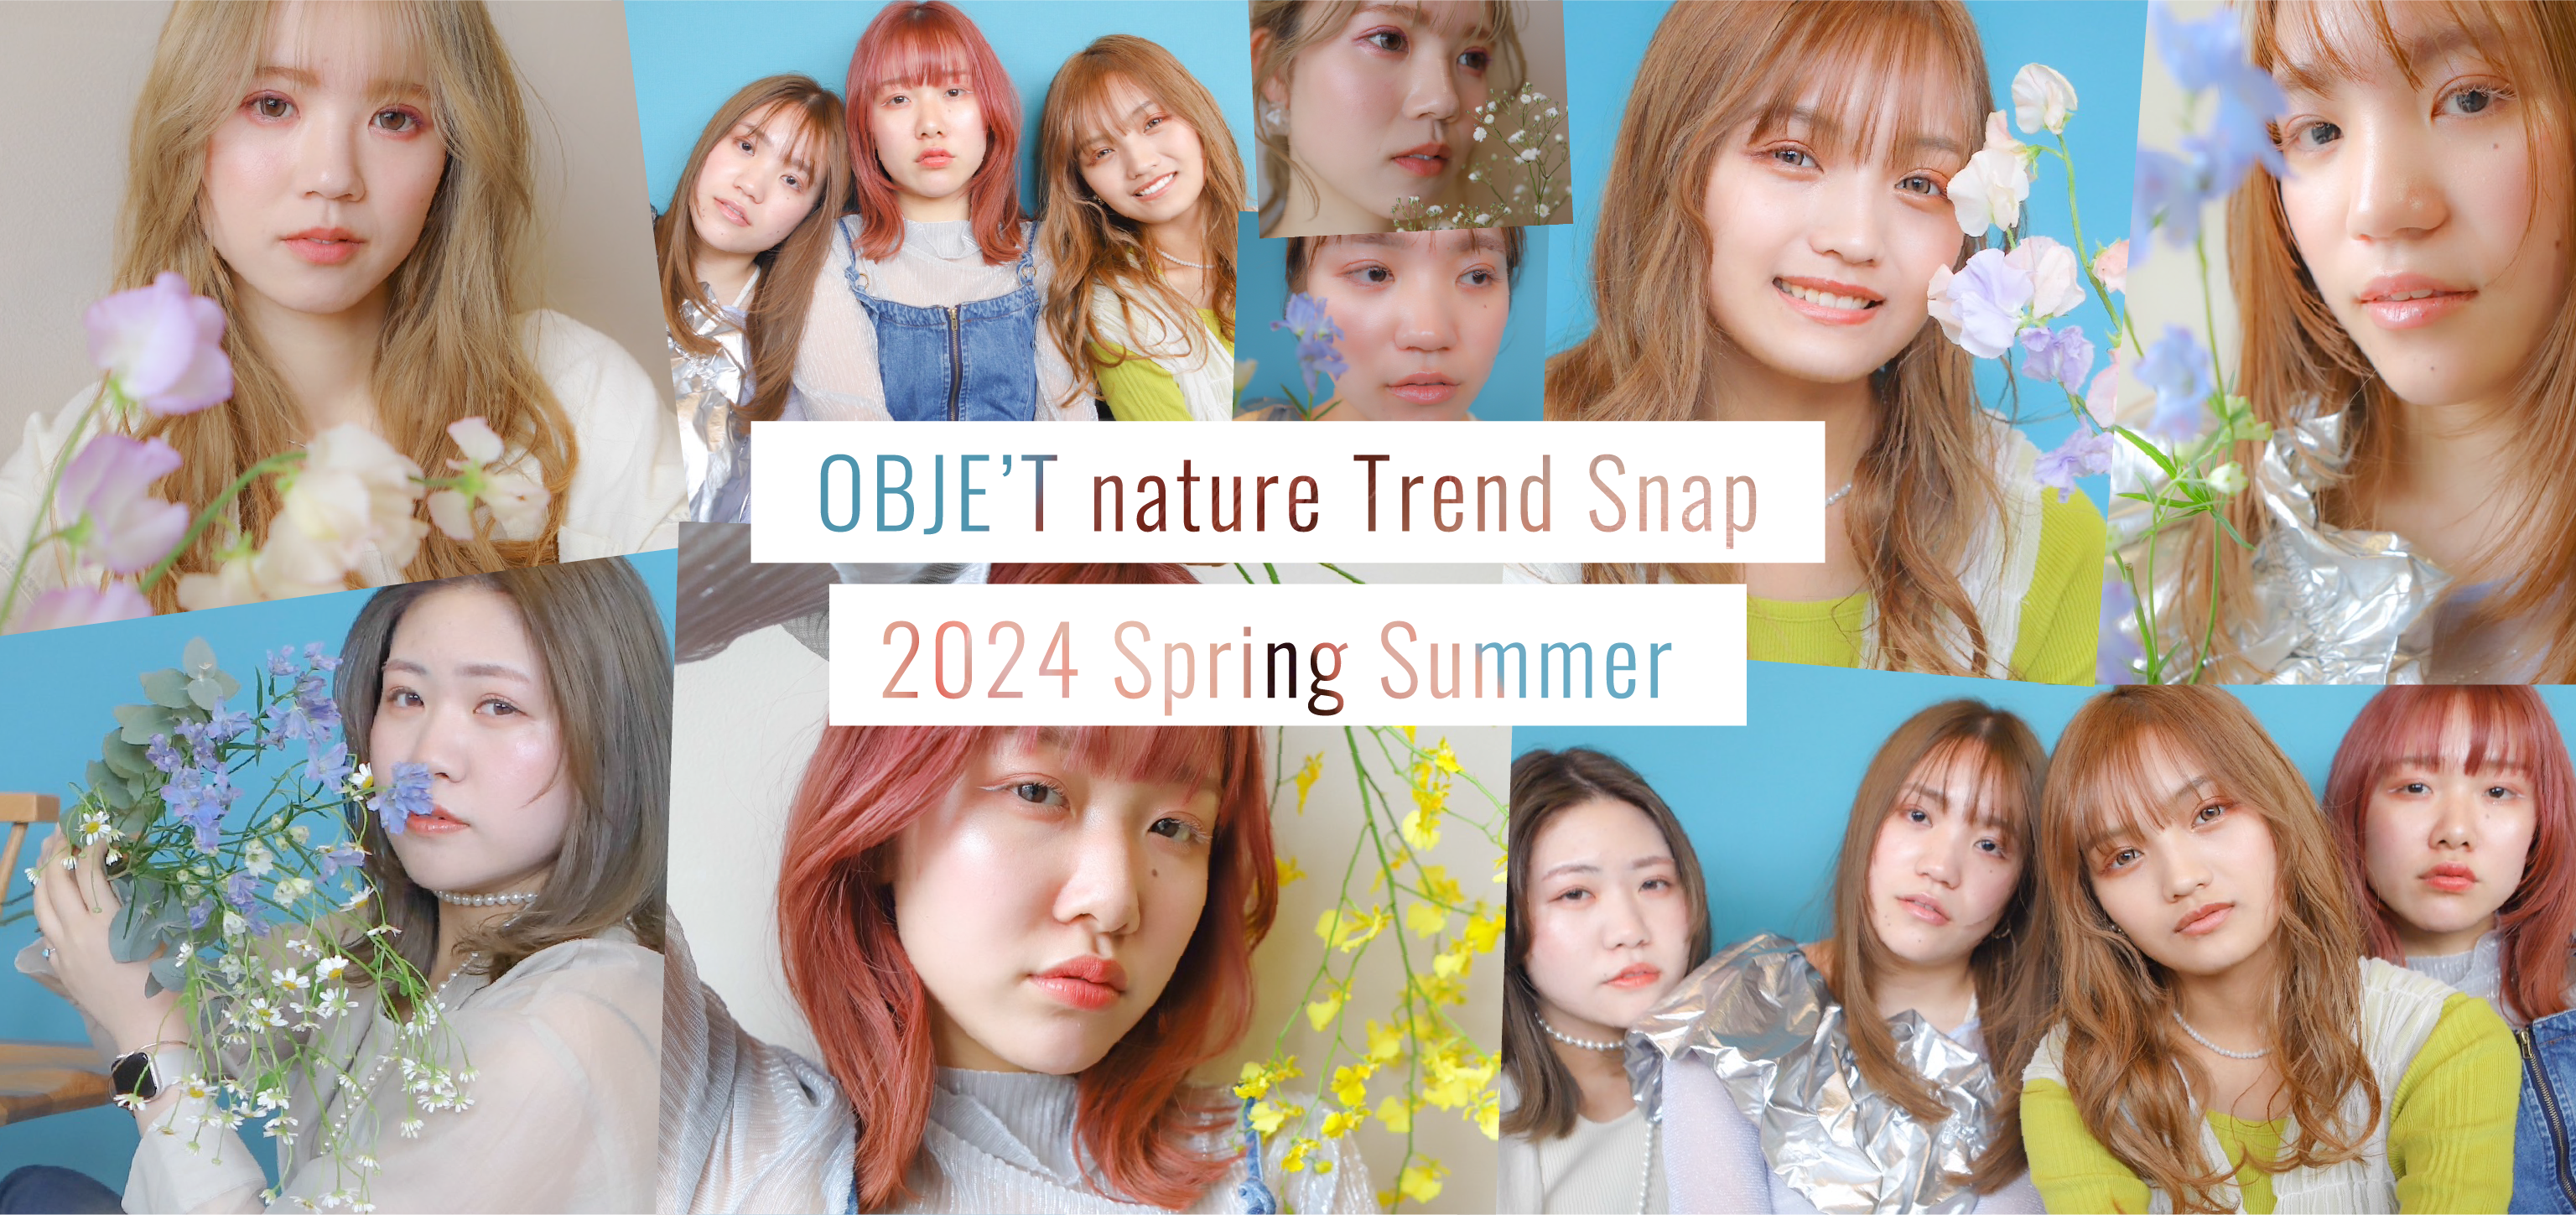 OBJE’T nature Trend Snap 2024 Spring Summer